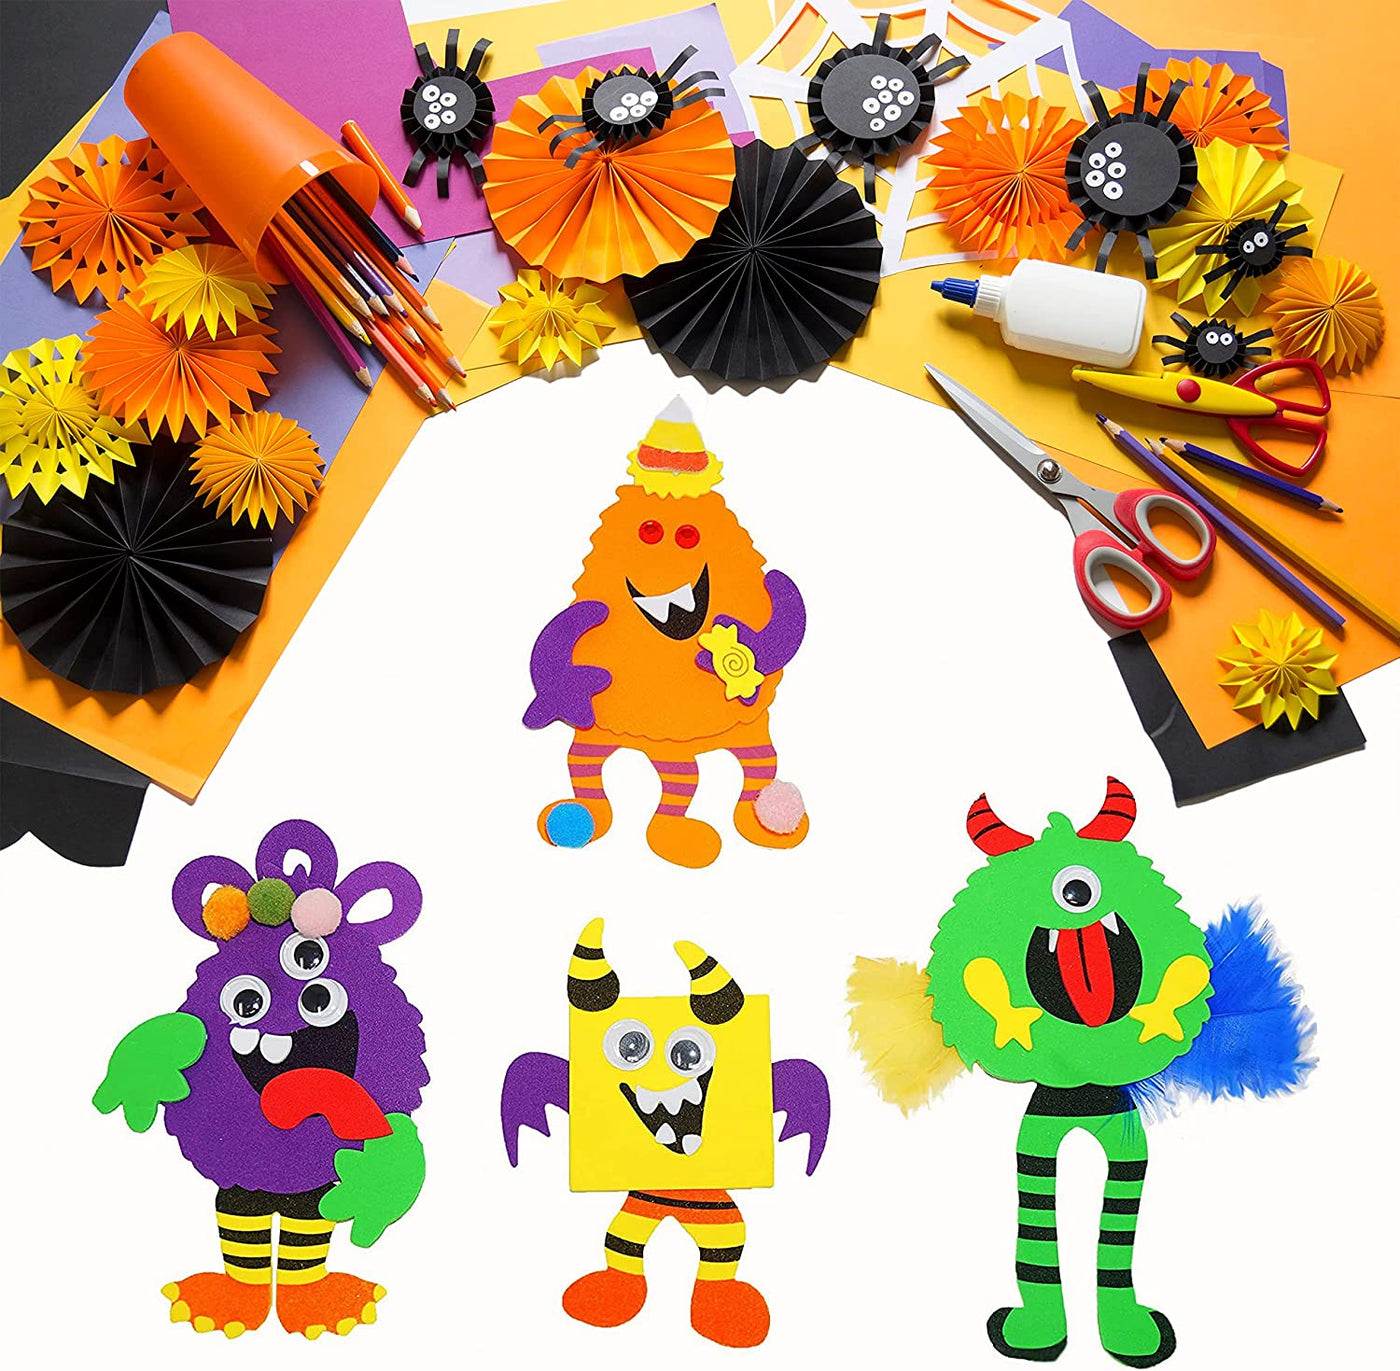 4E's Novelty Halloween Crafts for Kids (12 Pack) Silly Monsters Foam Magnet Fall Crafts for Kids Bulk, Halloween Party Activities for Kids Ages 3-5, 4-8